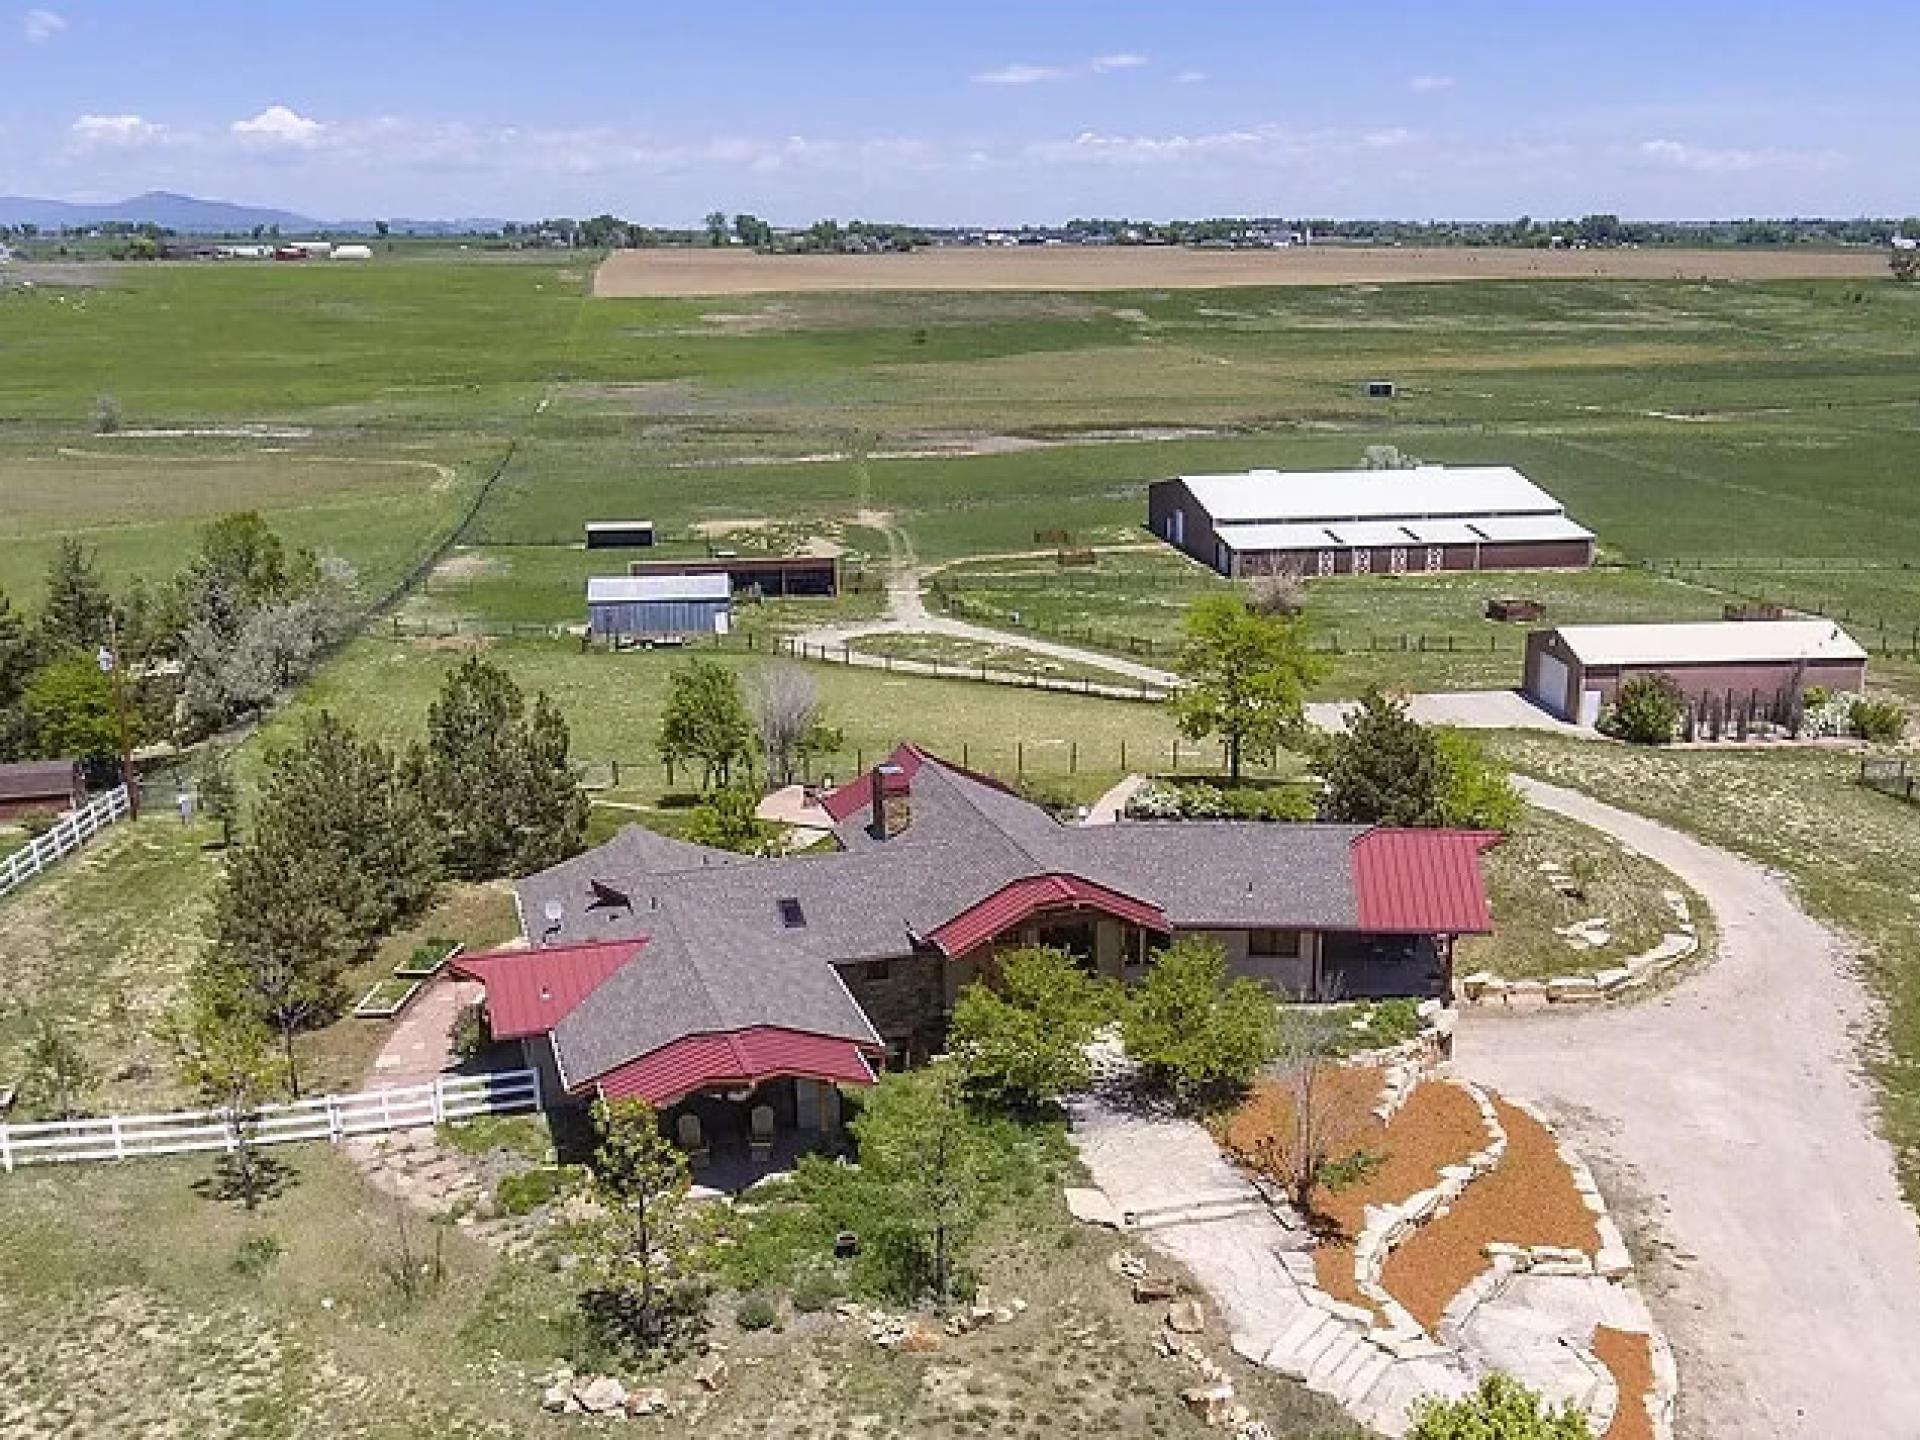 Ranch drone view